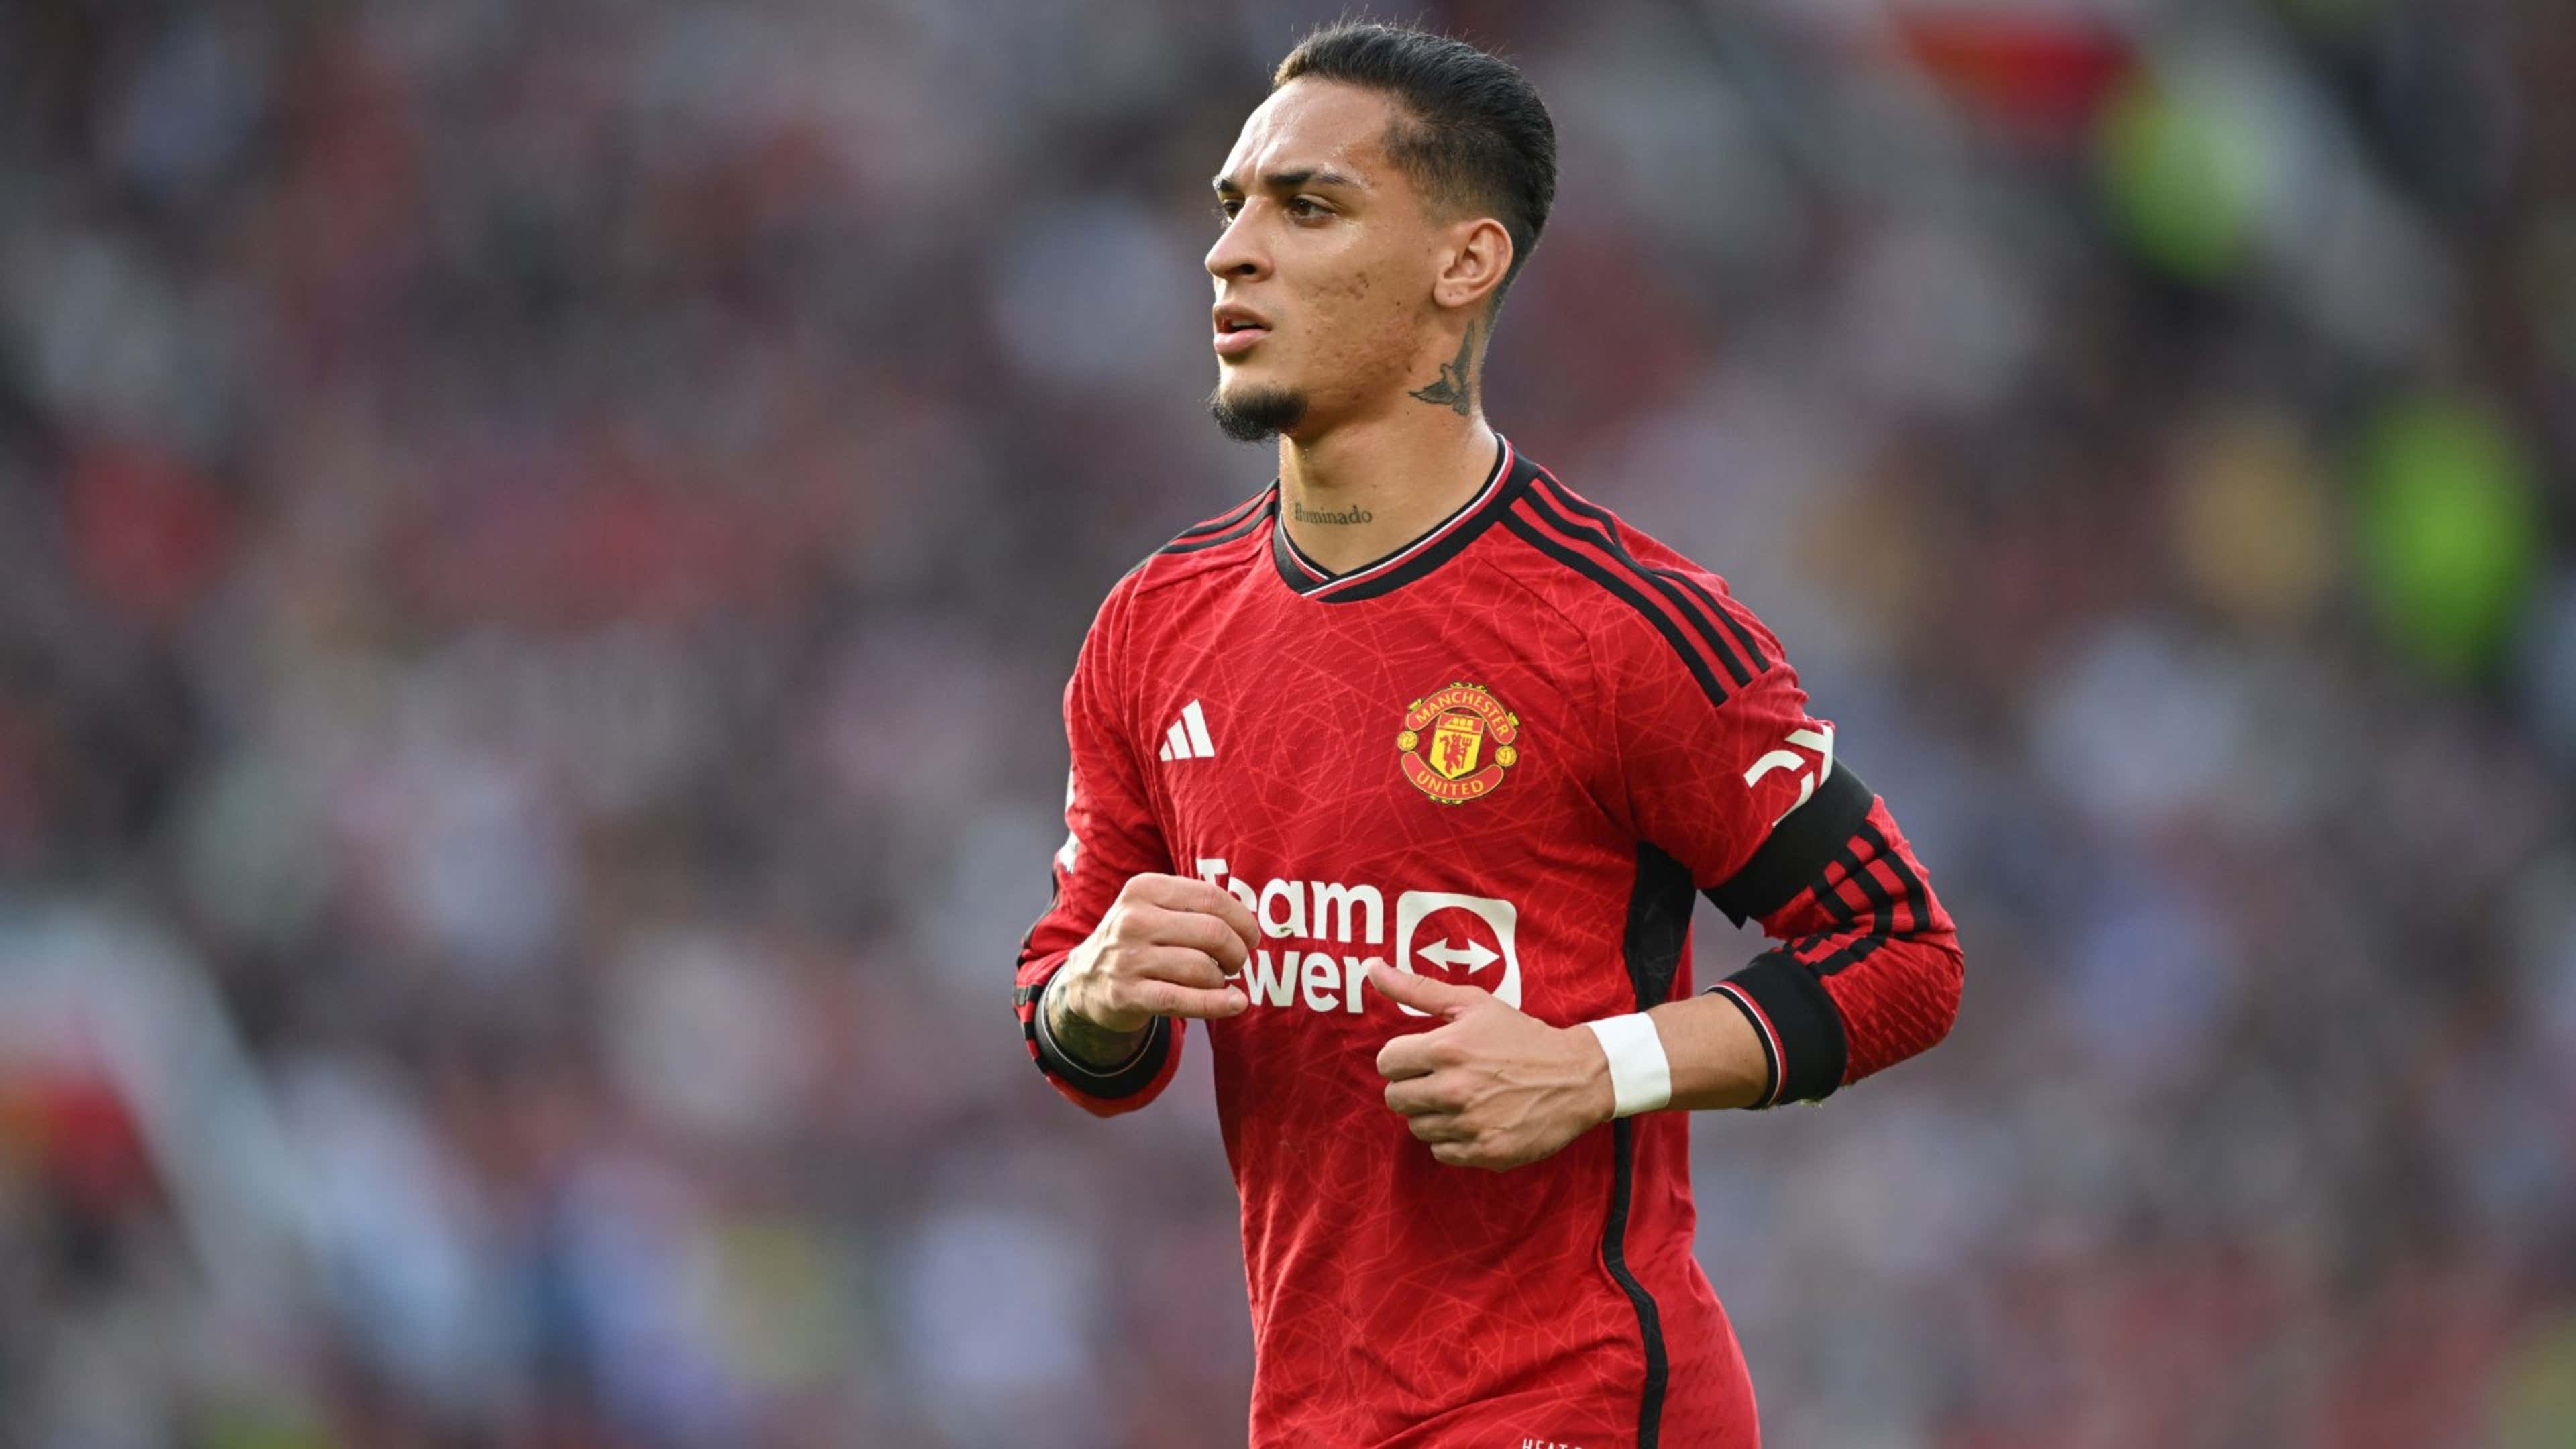 Manchester United table £51million bid for Antony but Ajax playing hardball  as they demand £68m for Brazilian winger